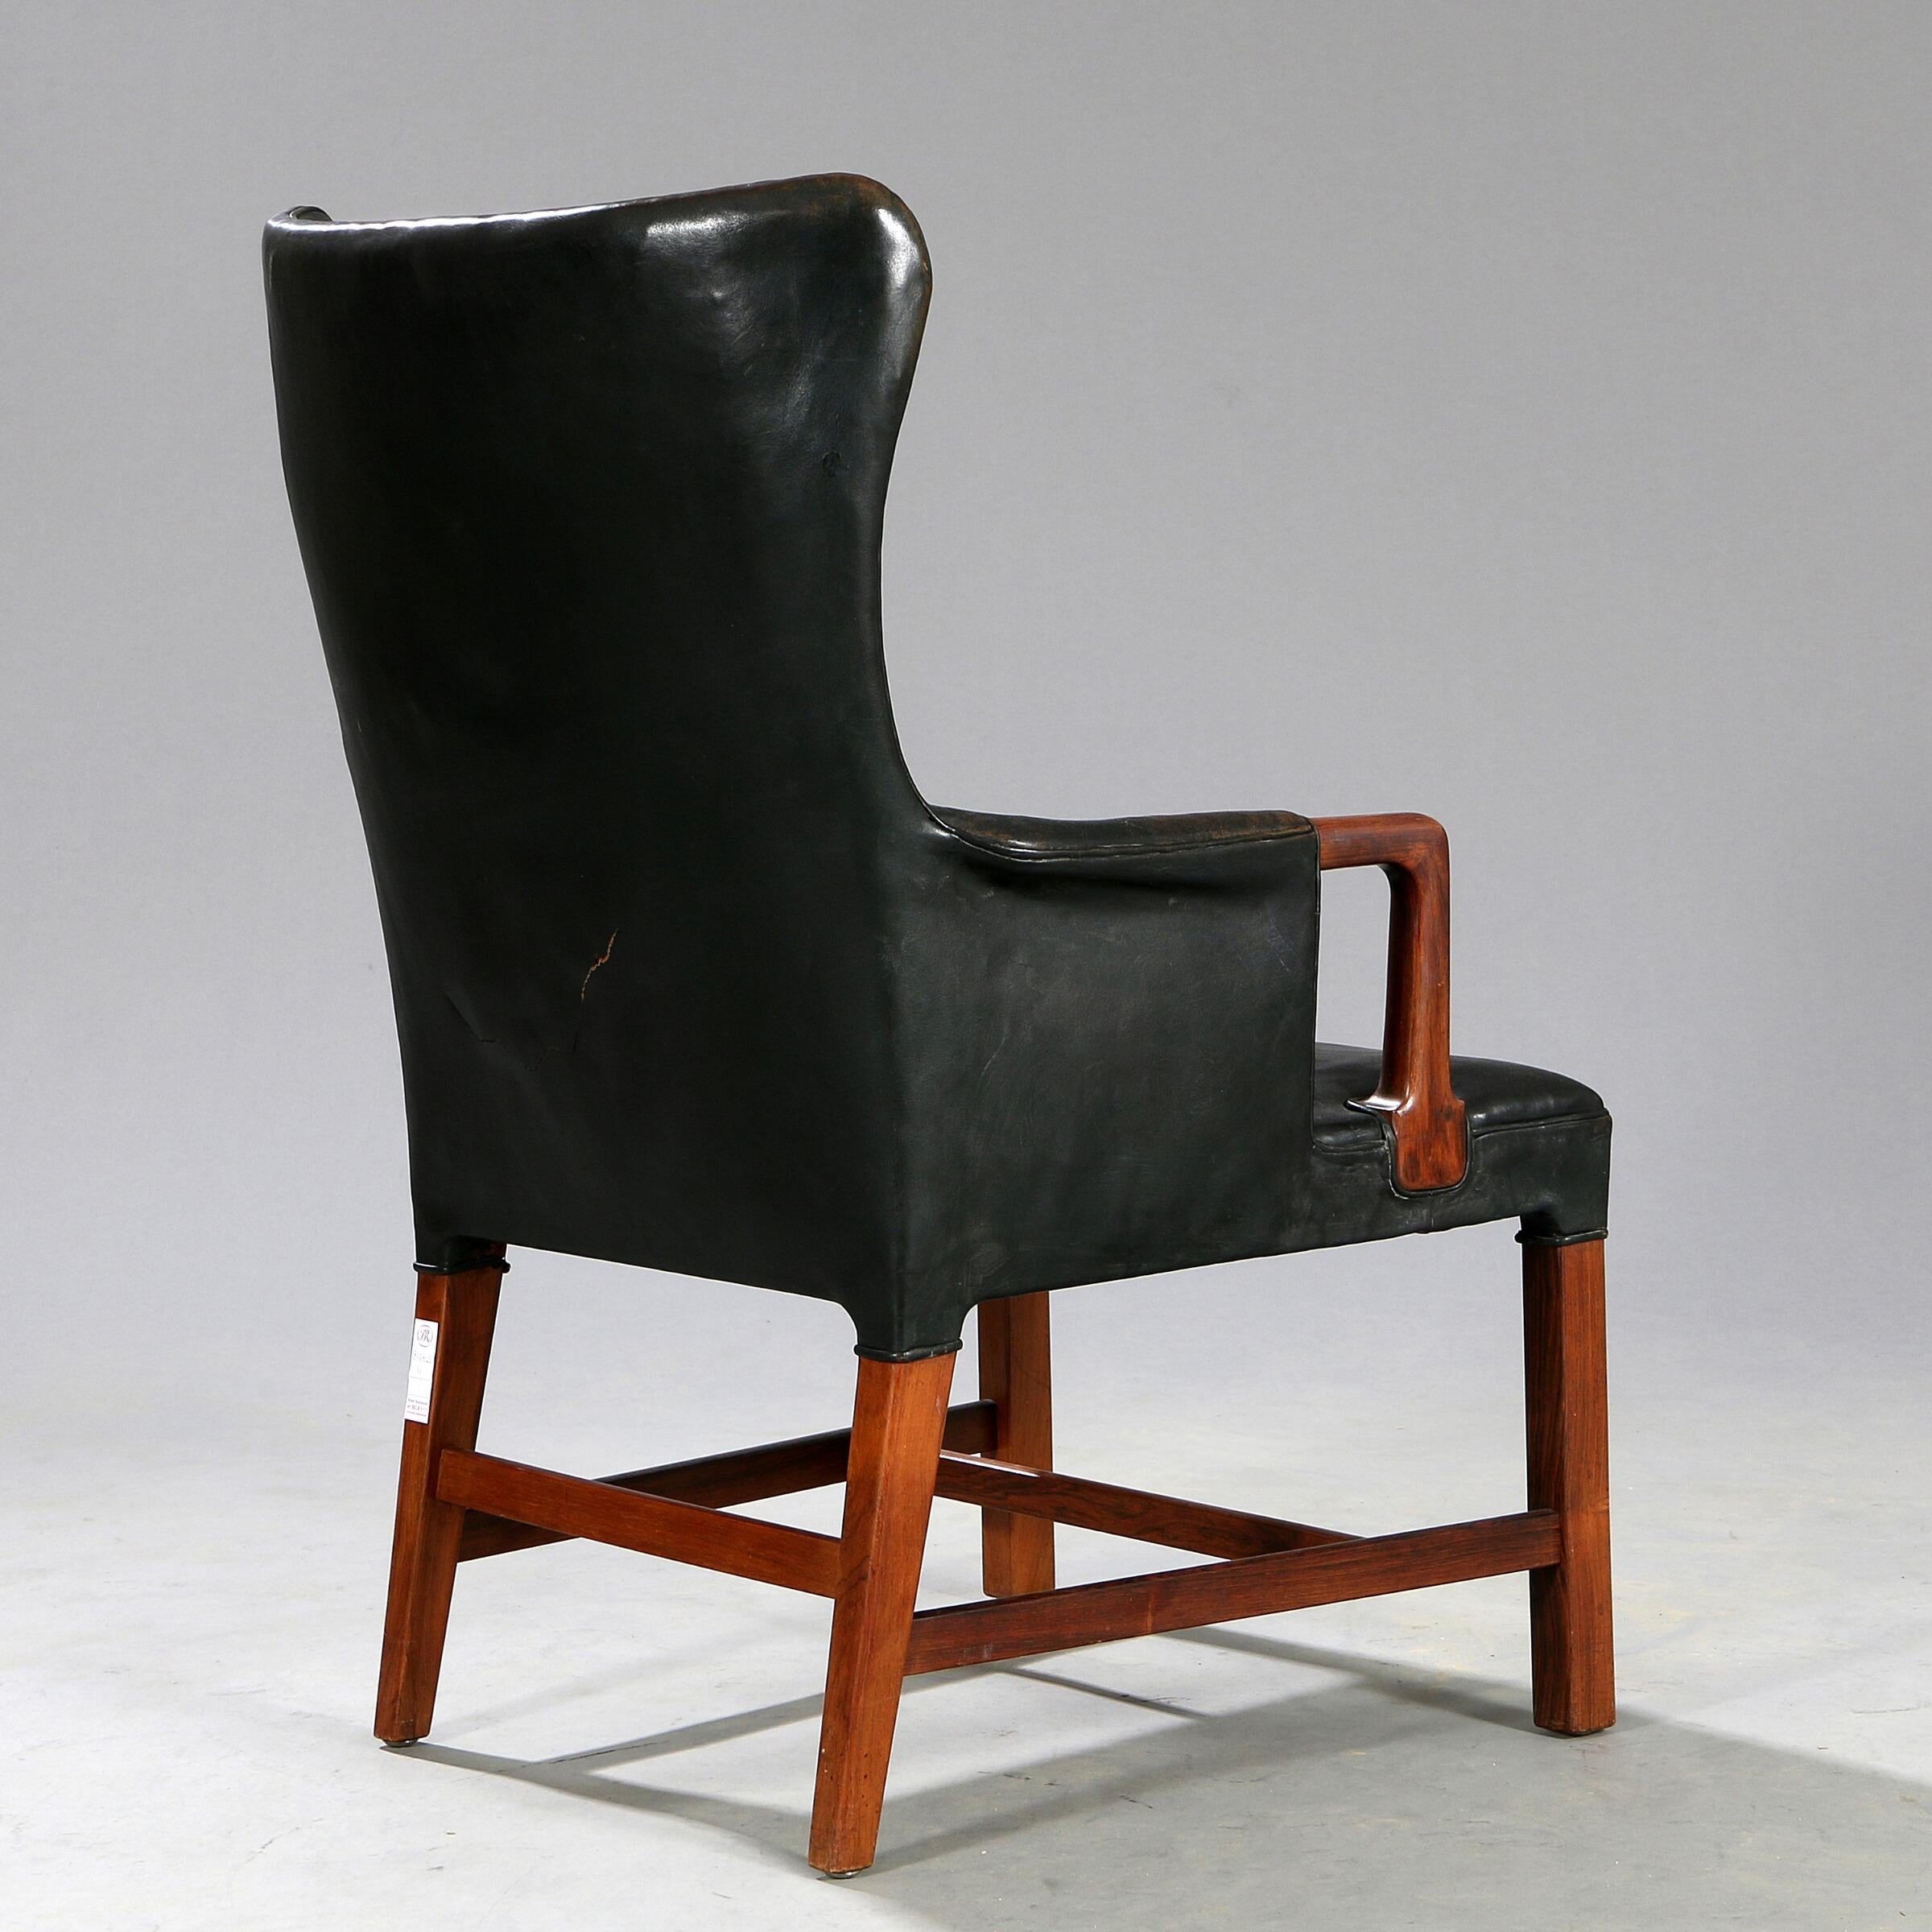 Scandinavian Modern Peter Hvidt: Armchair of Rosewood and Black Leather circa 1955 For Sale